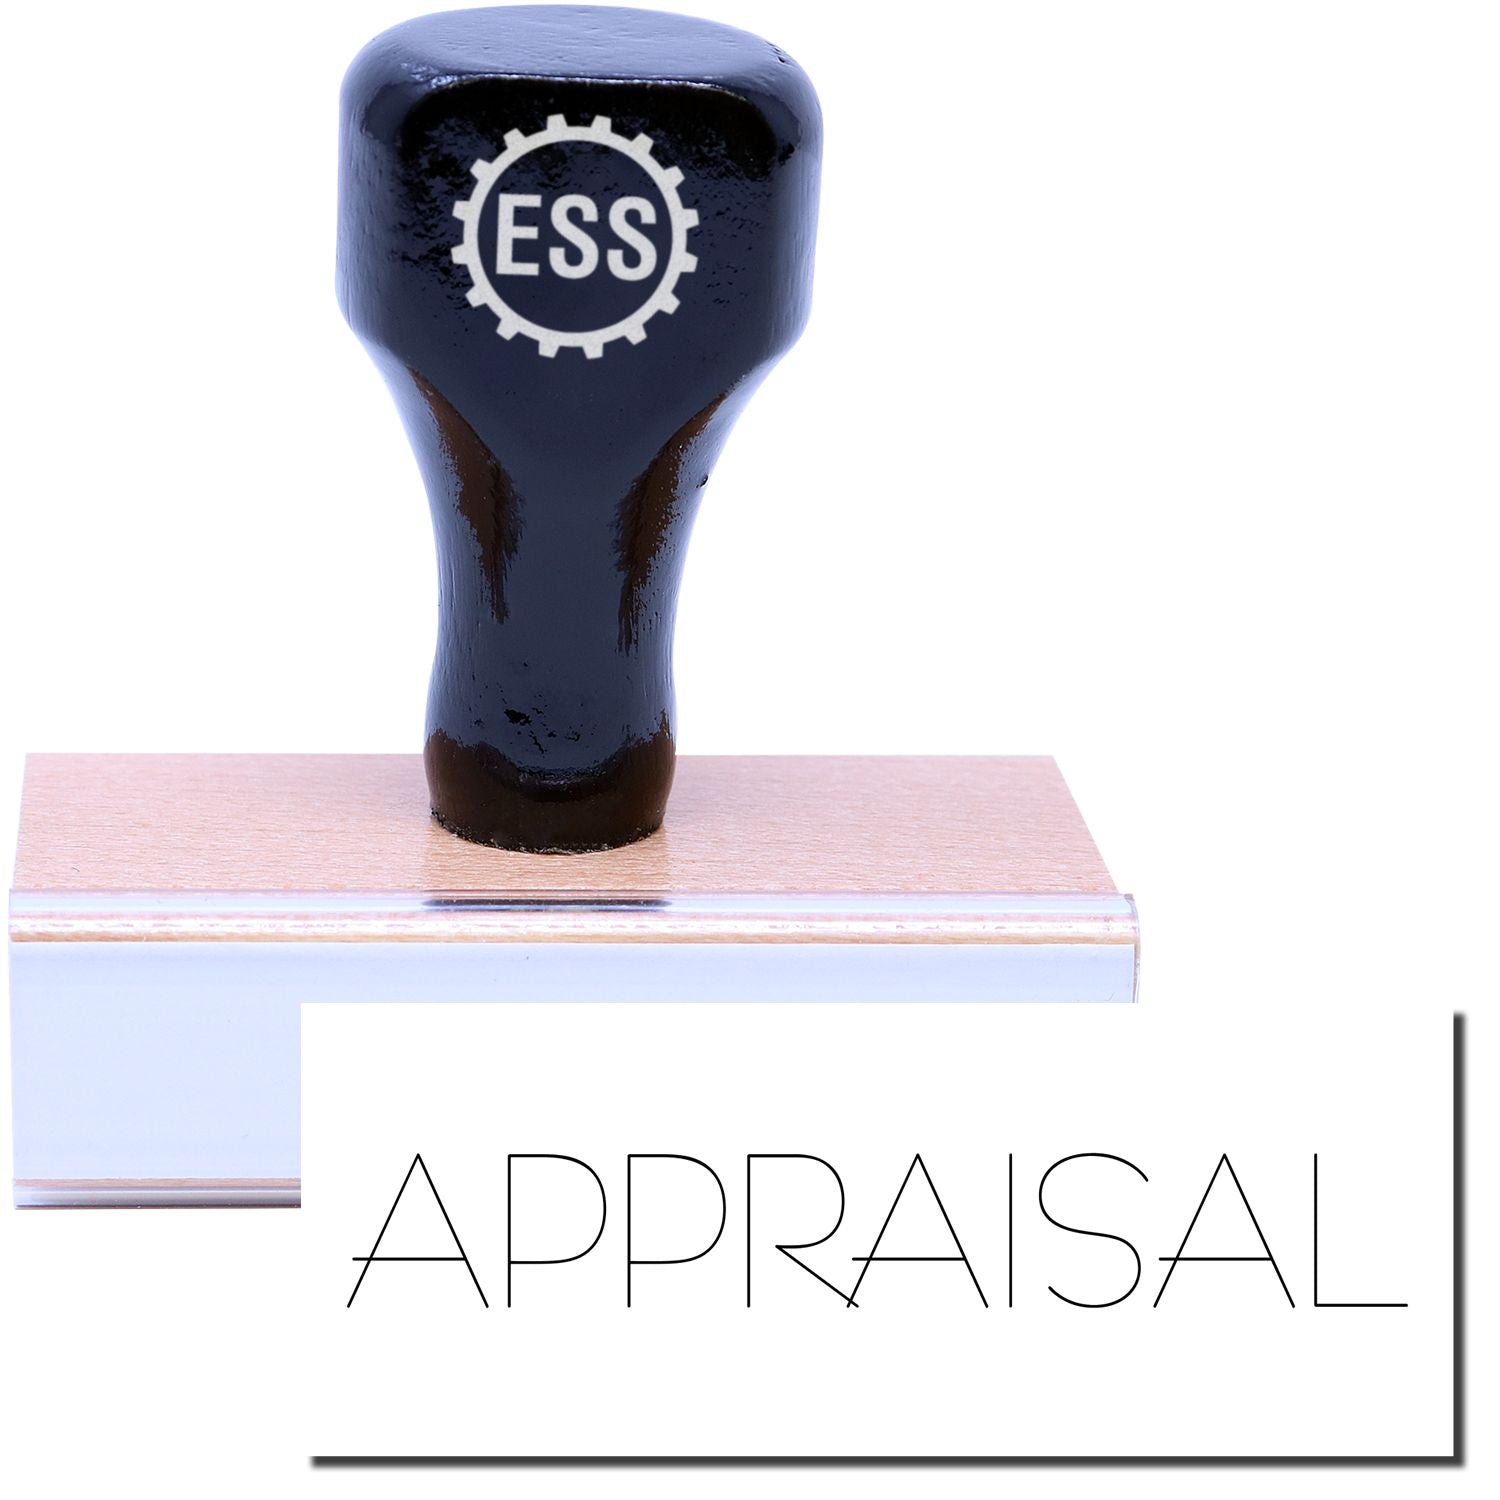 A stock office rubber stamp with a stamped image showing how the text "APPRAISAL" is displayed after stamping.